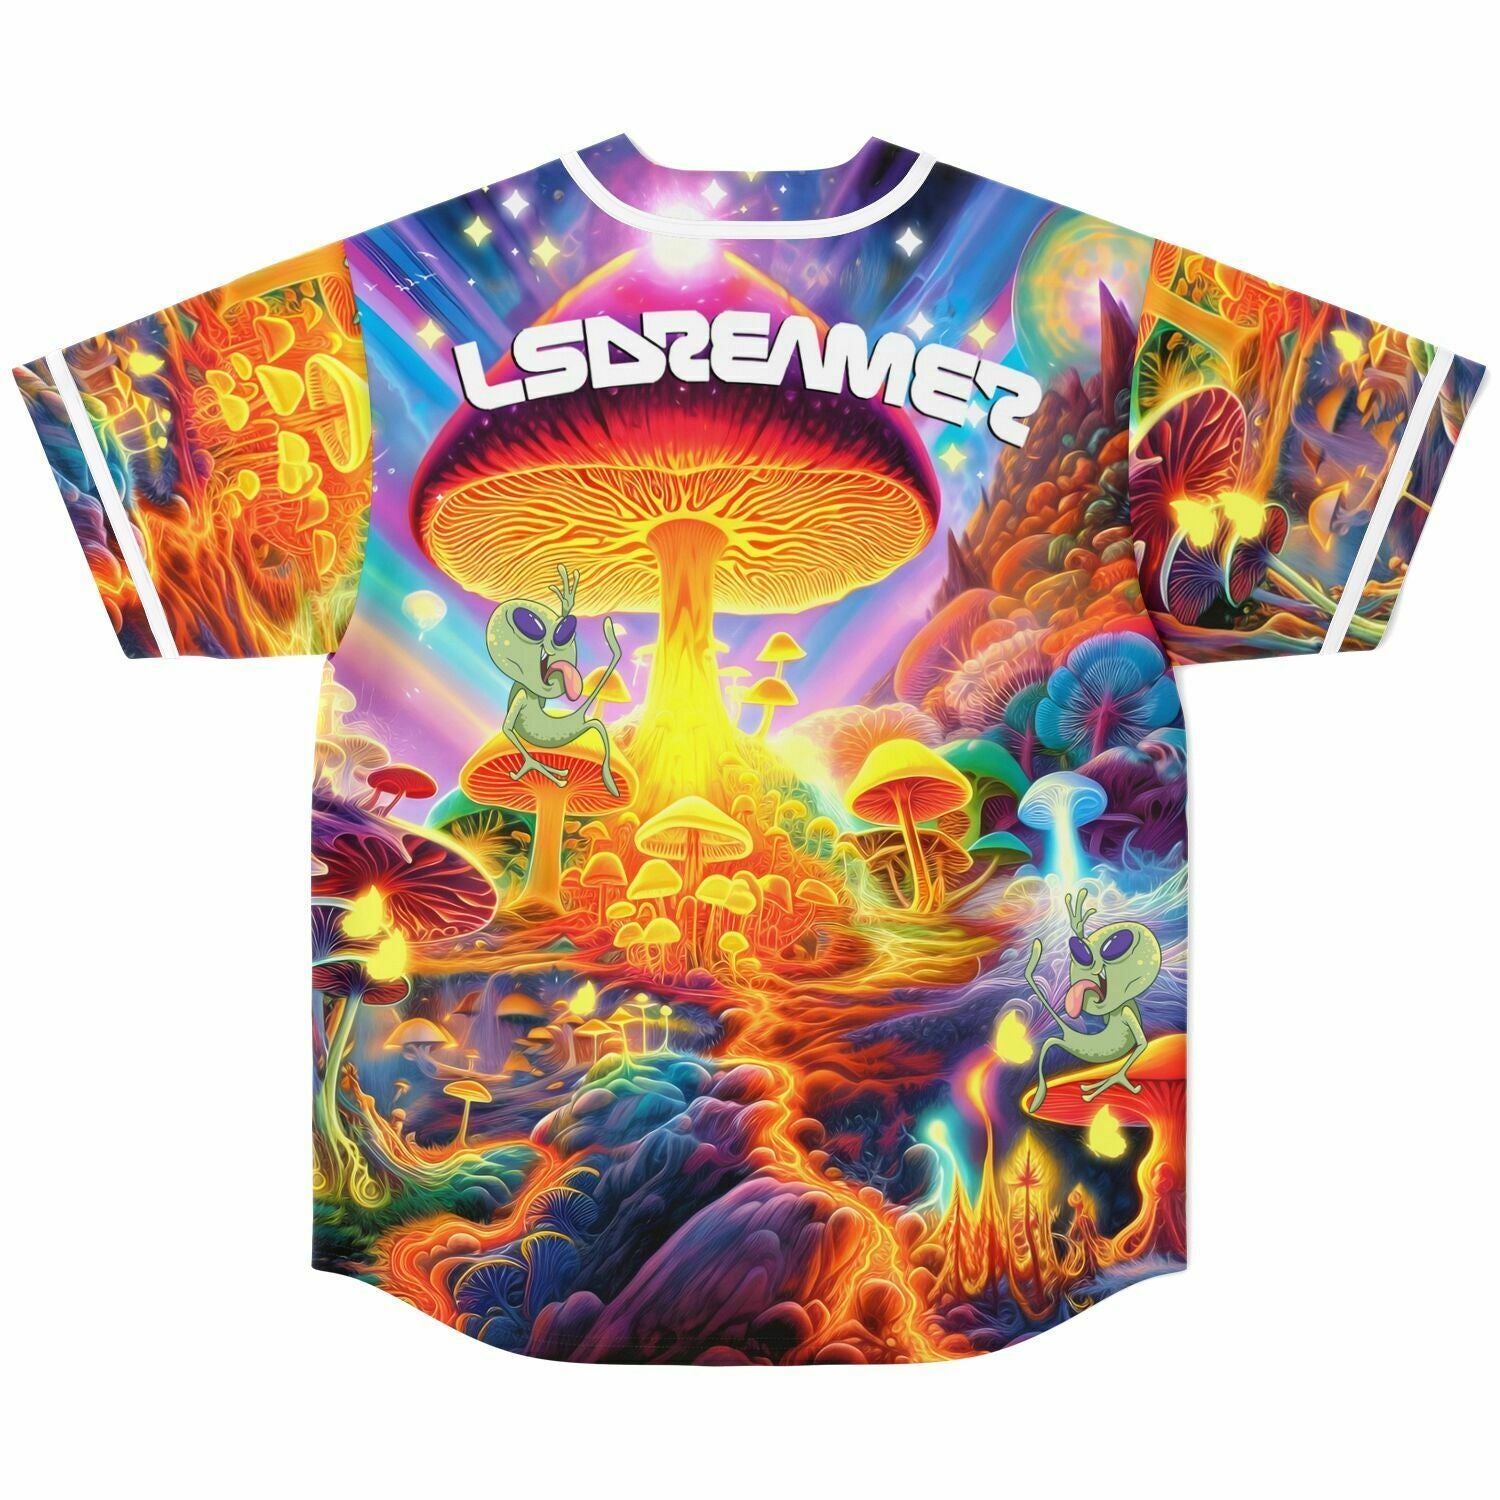 a Baseball jersey with an image of a mushroom and Lsdream print